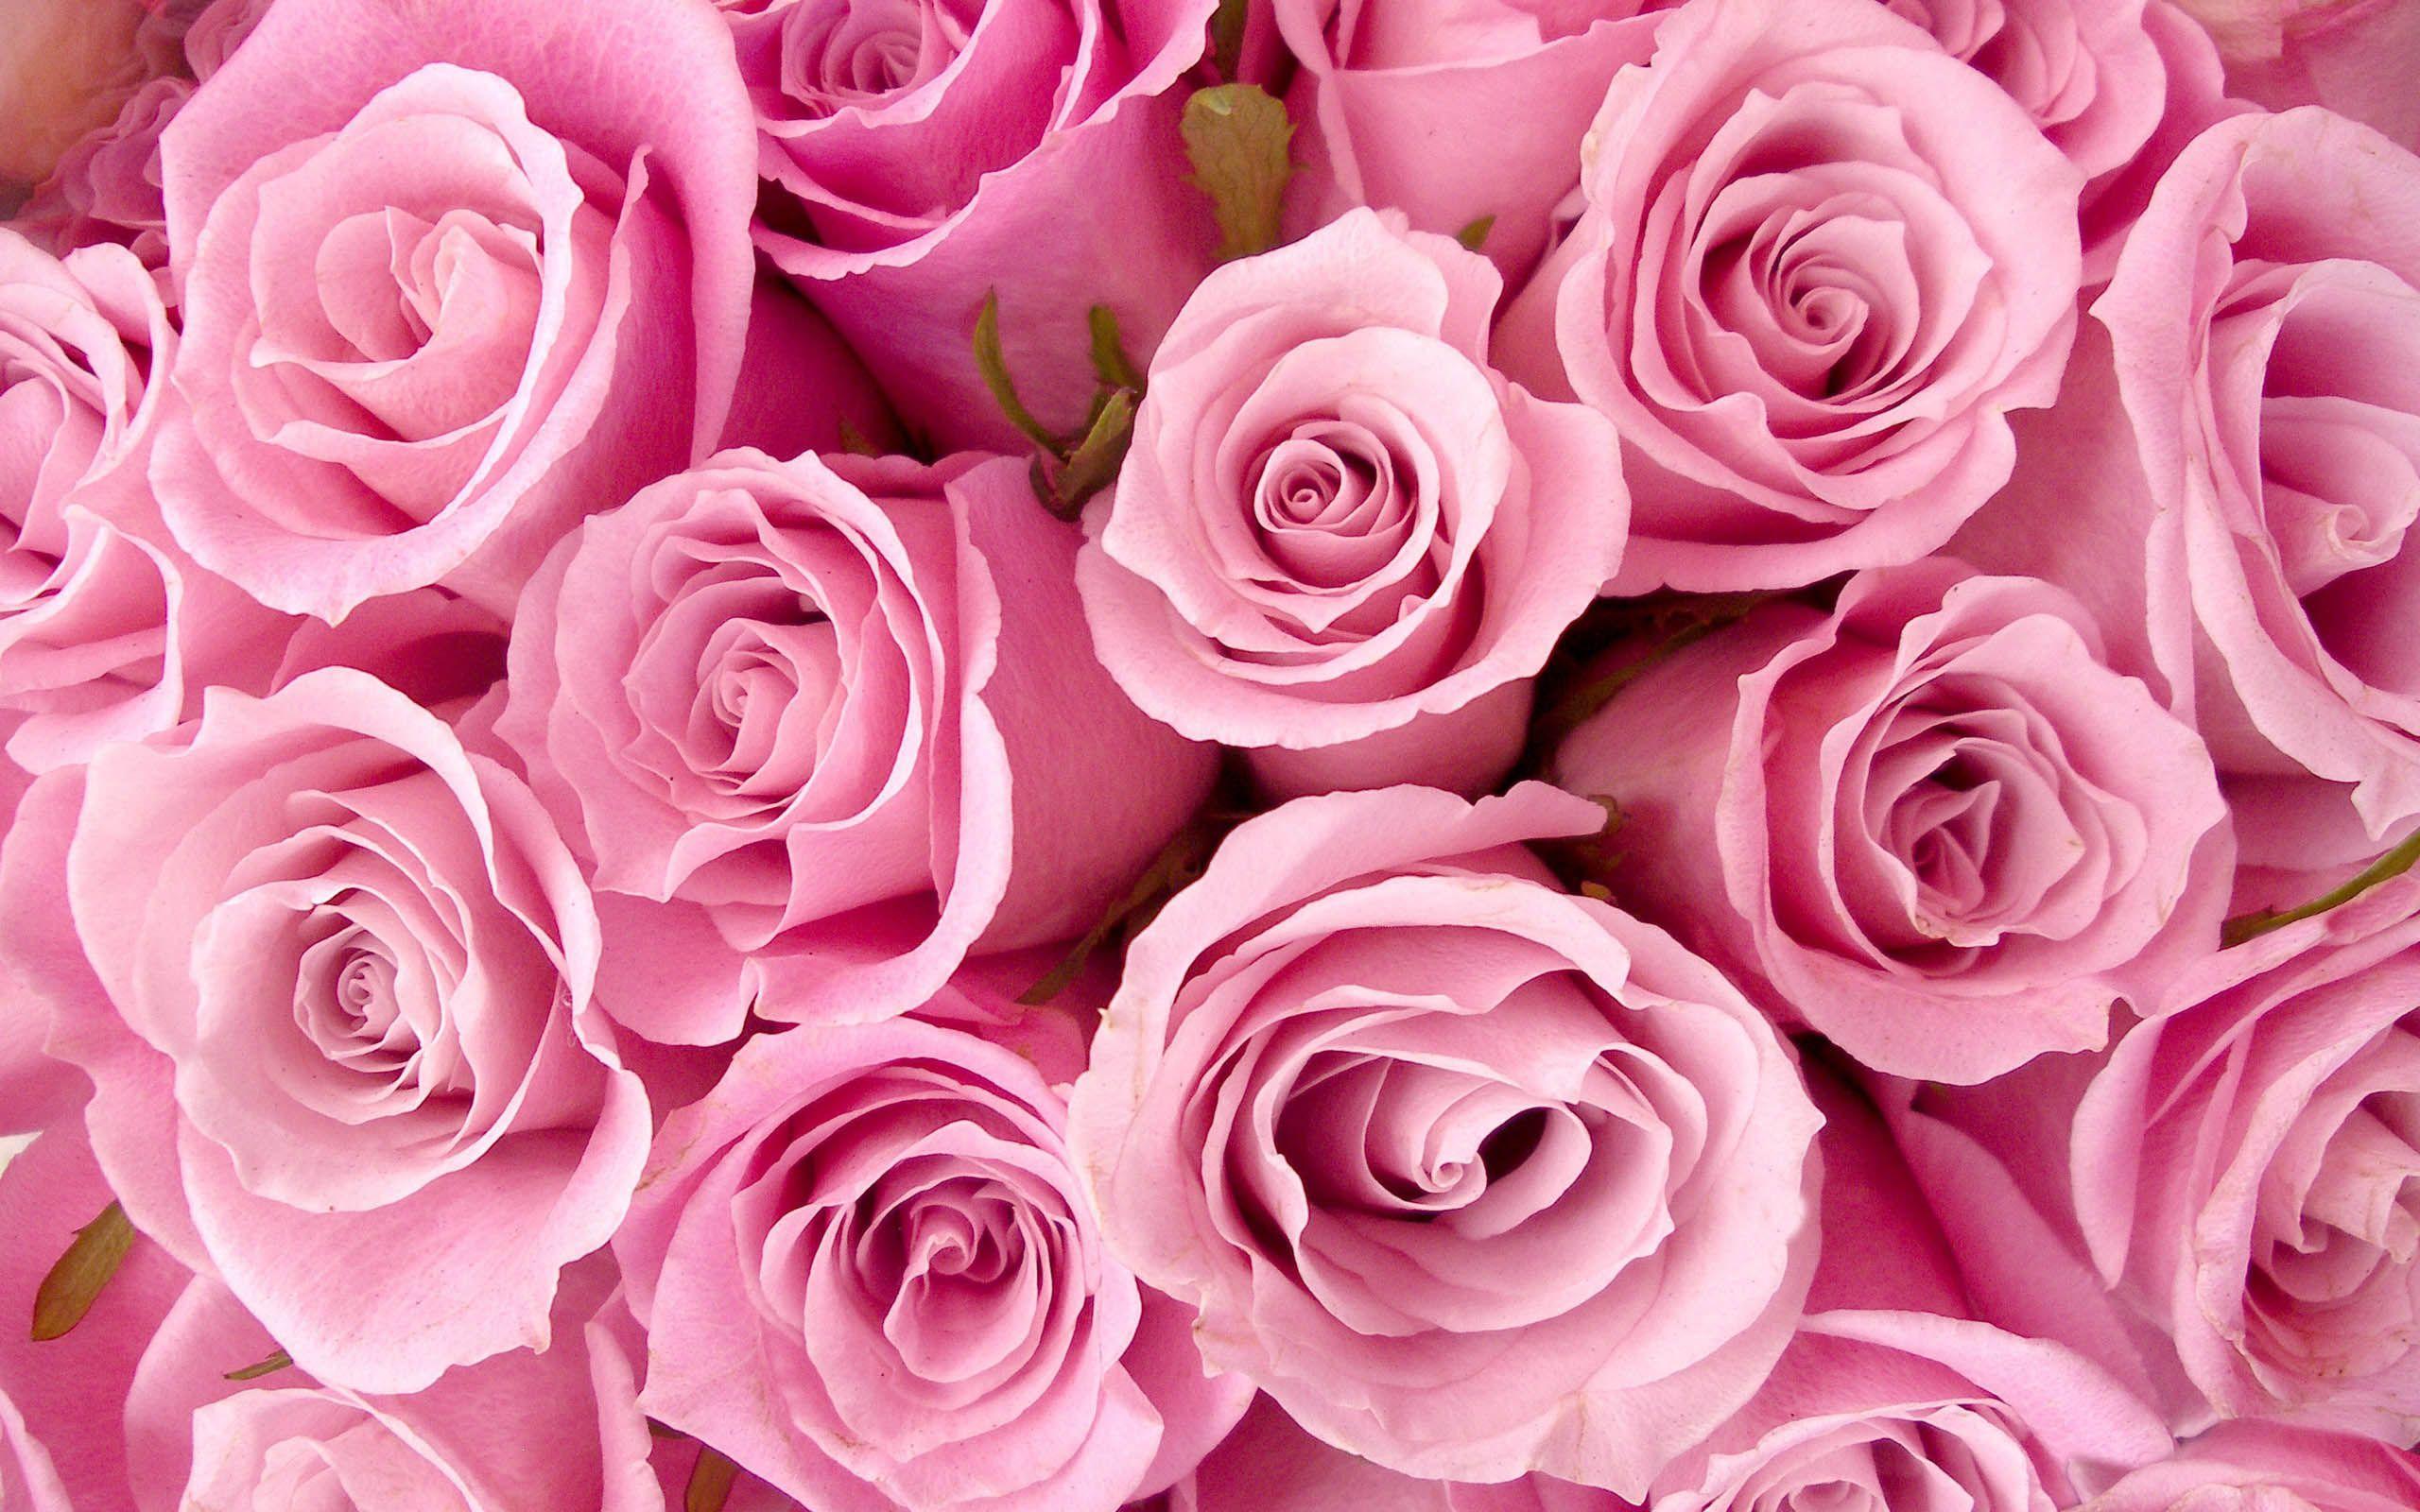 Pink Rose Picture download free